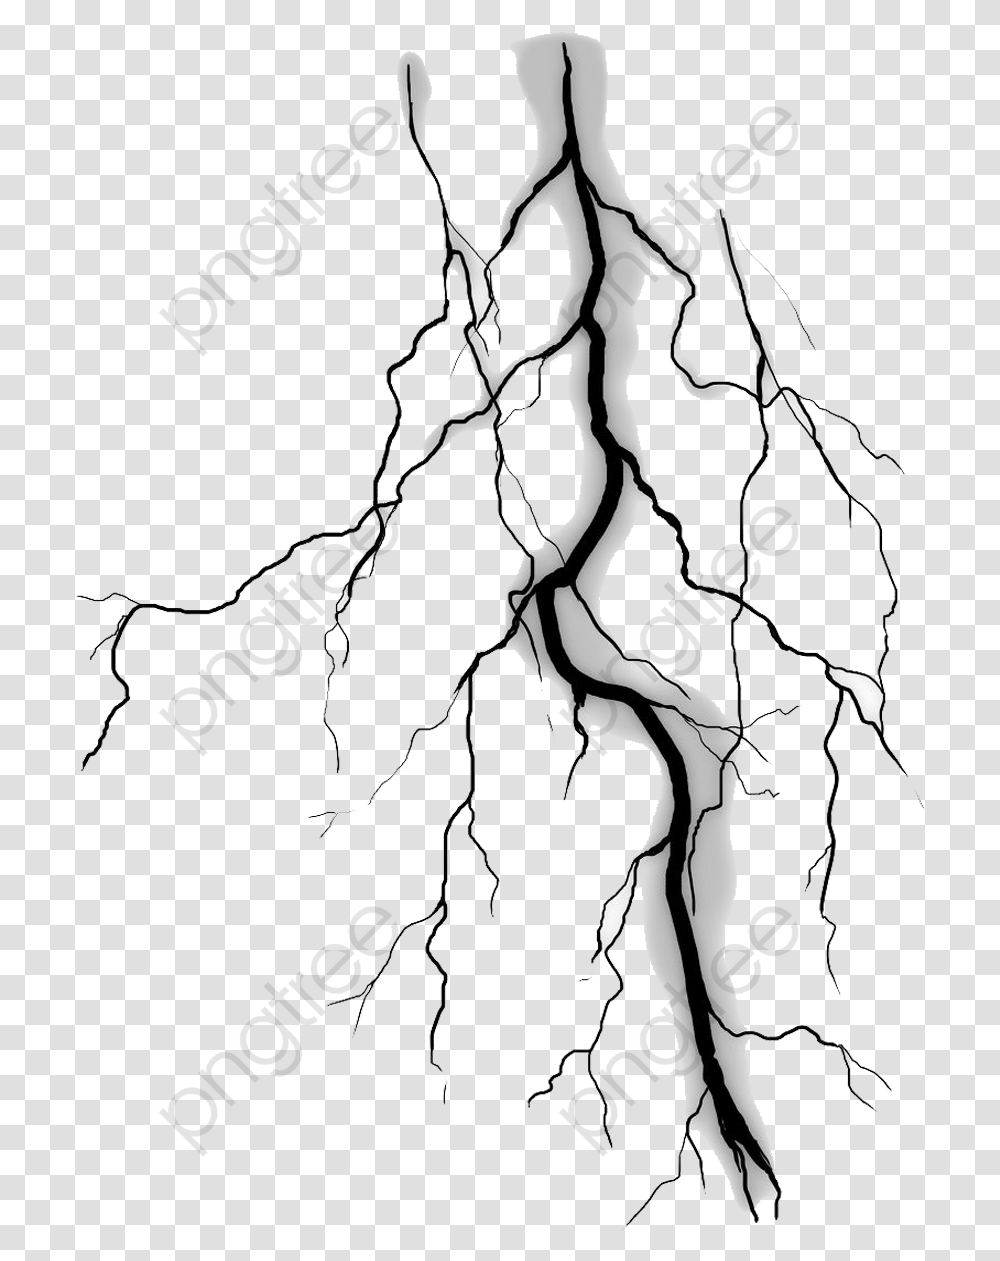 Material Clipart Thunder And Drawings Of Lightning, Plant, Tree, Root, Tree Trunk Transparent Png